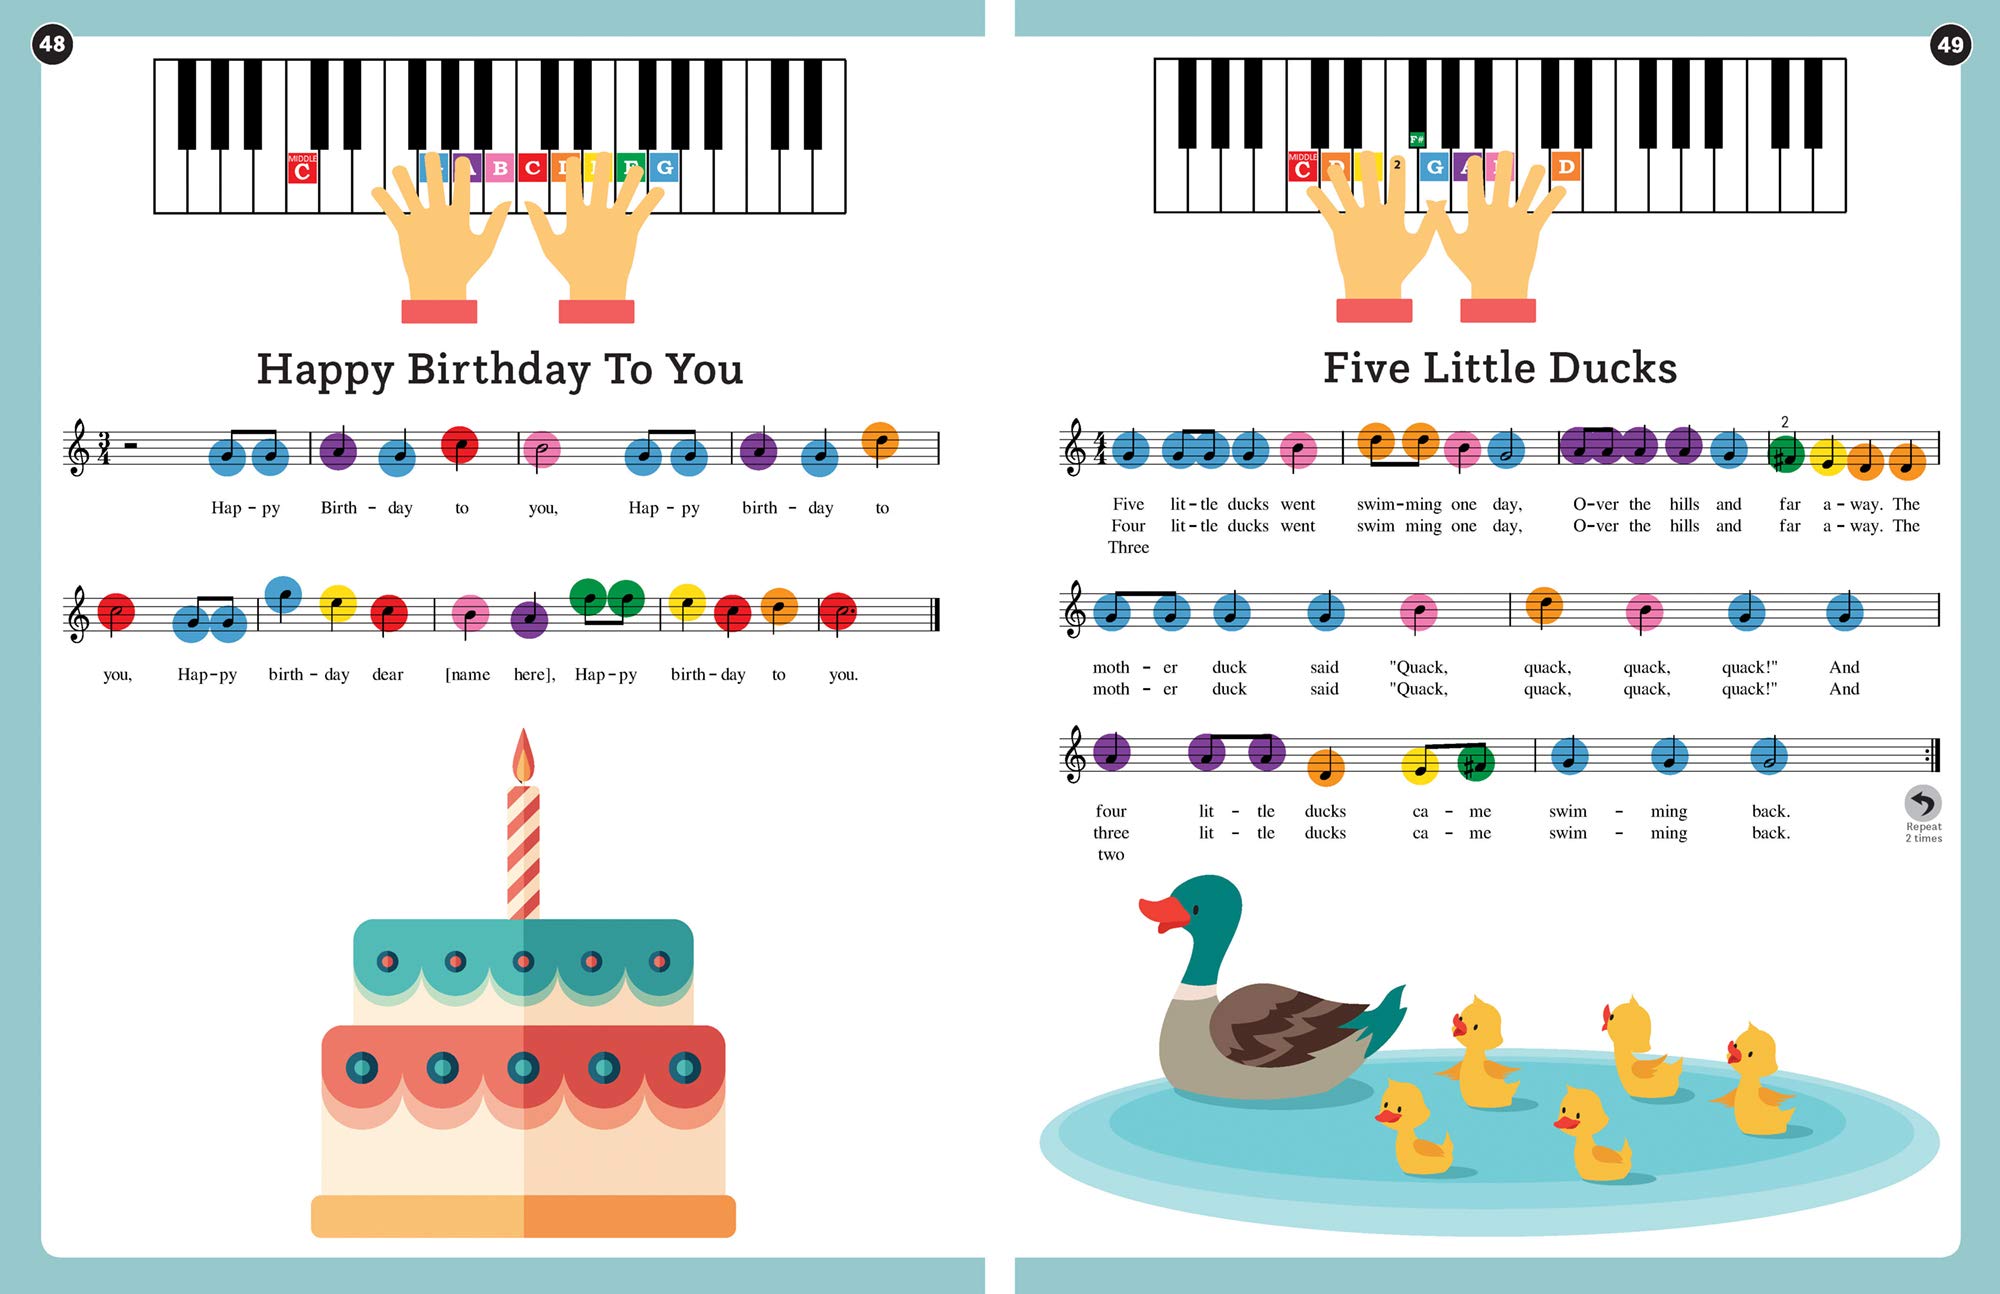 Play It! Children's Songs: A Superfast Way to Learn Awesome Songs on Your Piano or Keyboard